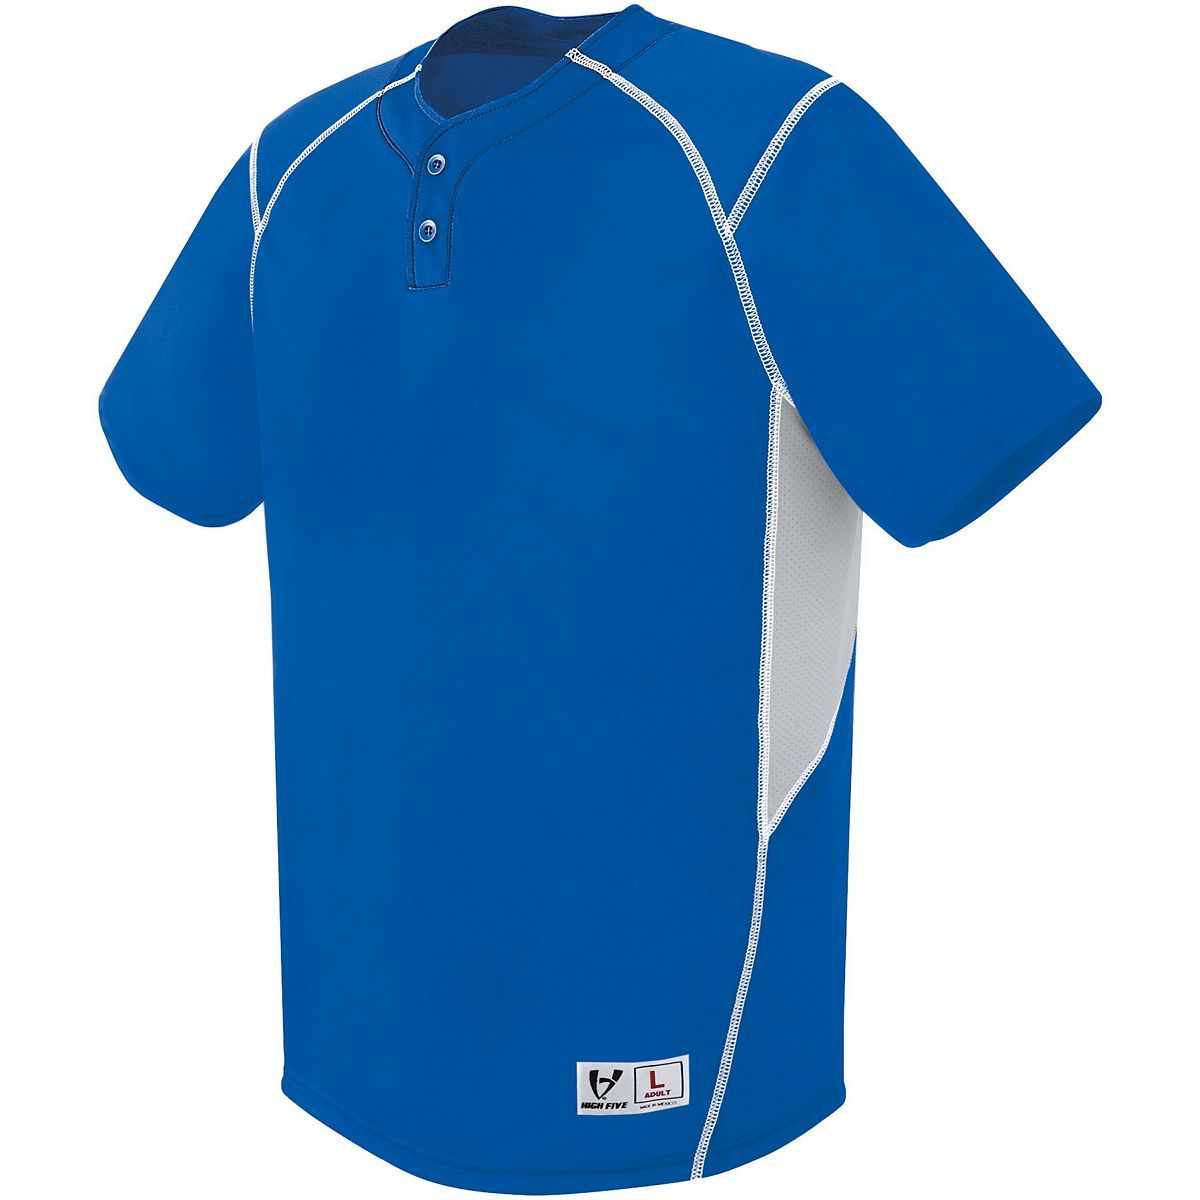 Augusta Sportswear Youth Bandit Two-Button Jersey in Royal/Silver Grey/White  -Part of the Youth, Youth-Jersey, Augusta-Products, Baseball, Shirts, All-Sports, All-Sports-1 product lines at KanaleyCreations.com